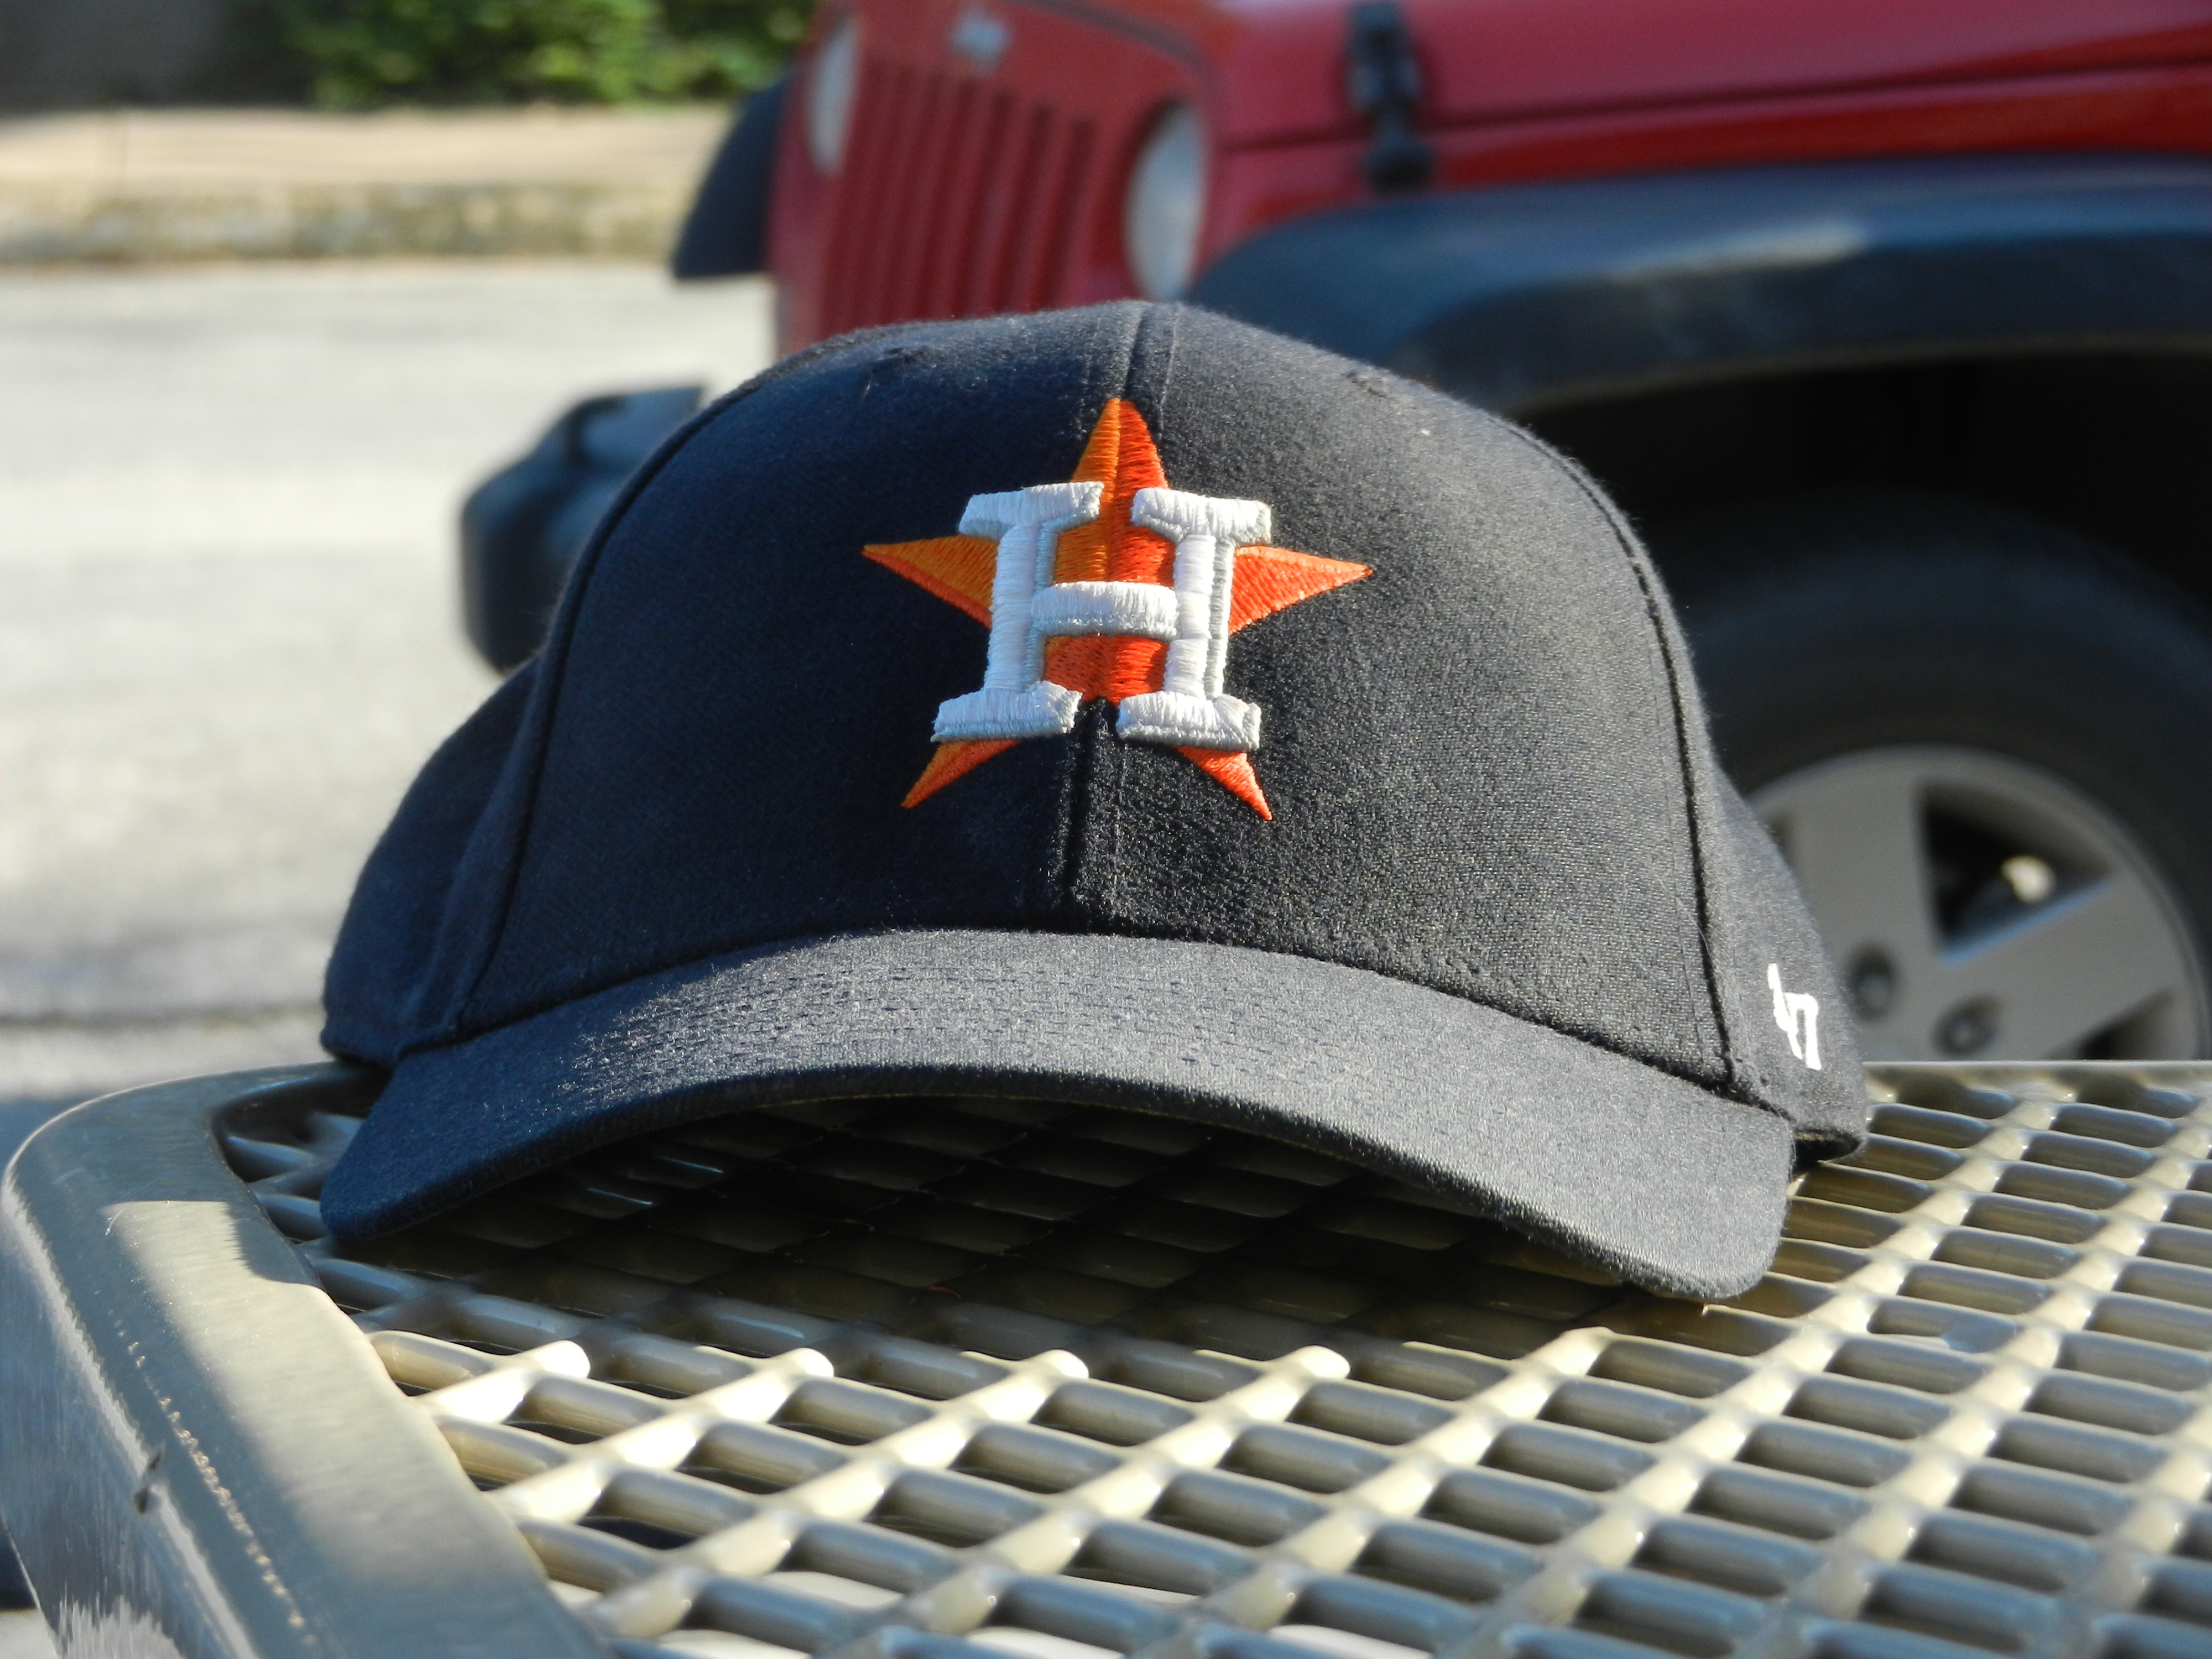 An Astros cap sits at the edge of a picnic table.